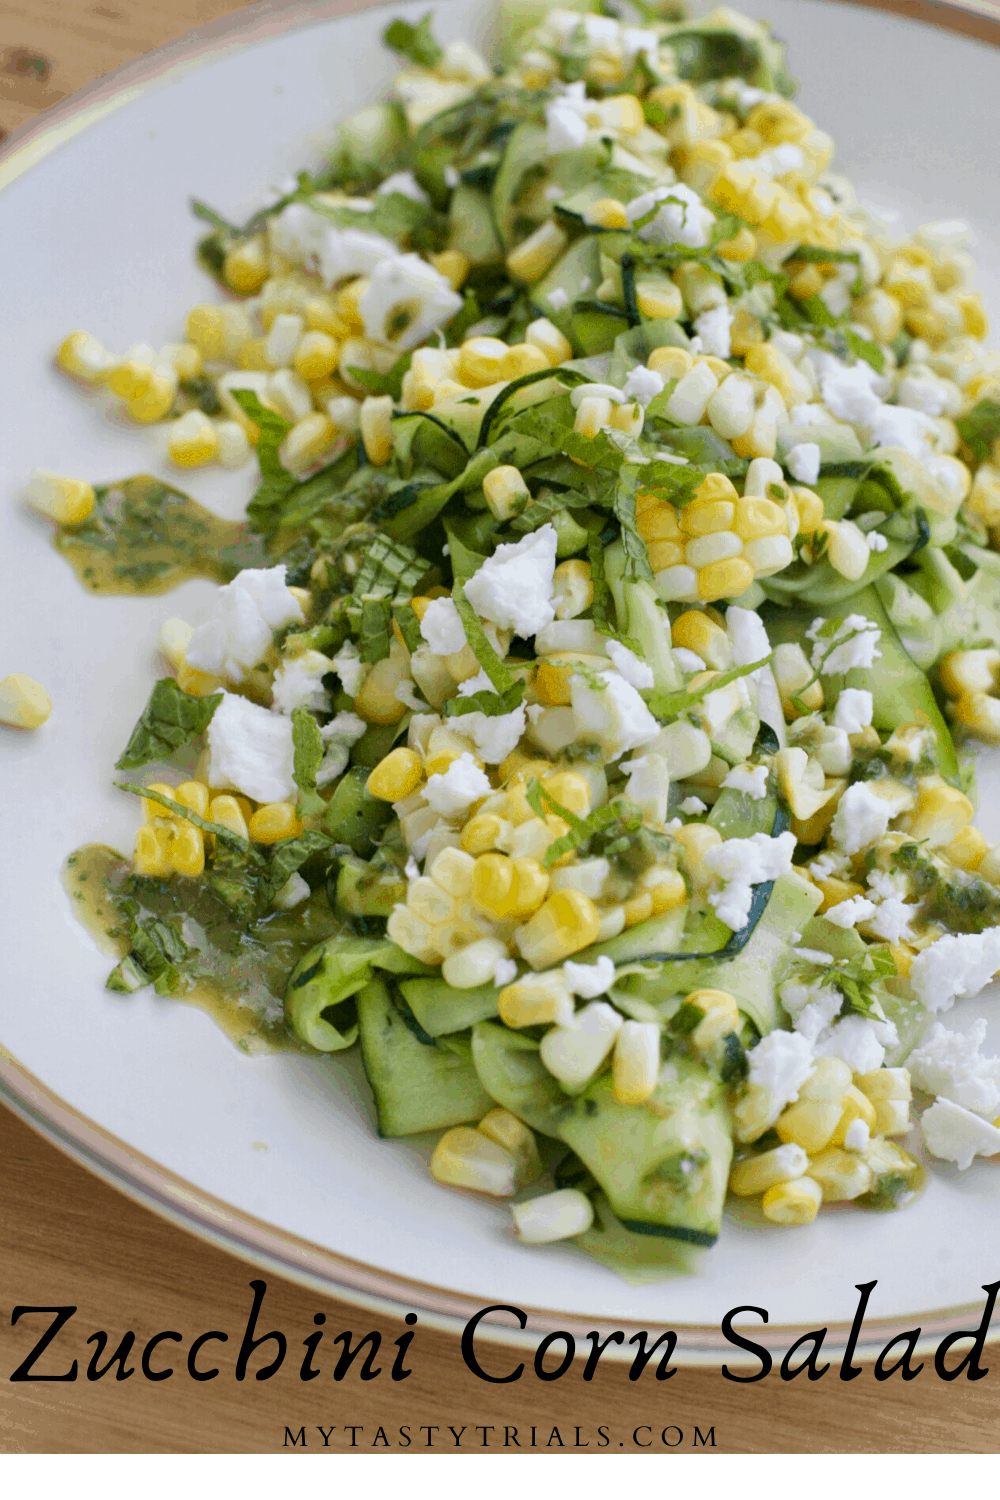 Zucchini Corn Salad with Herby Dressing